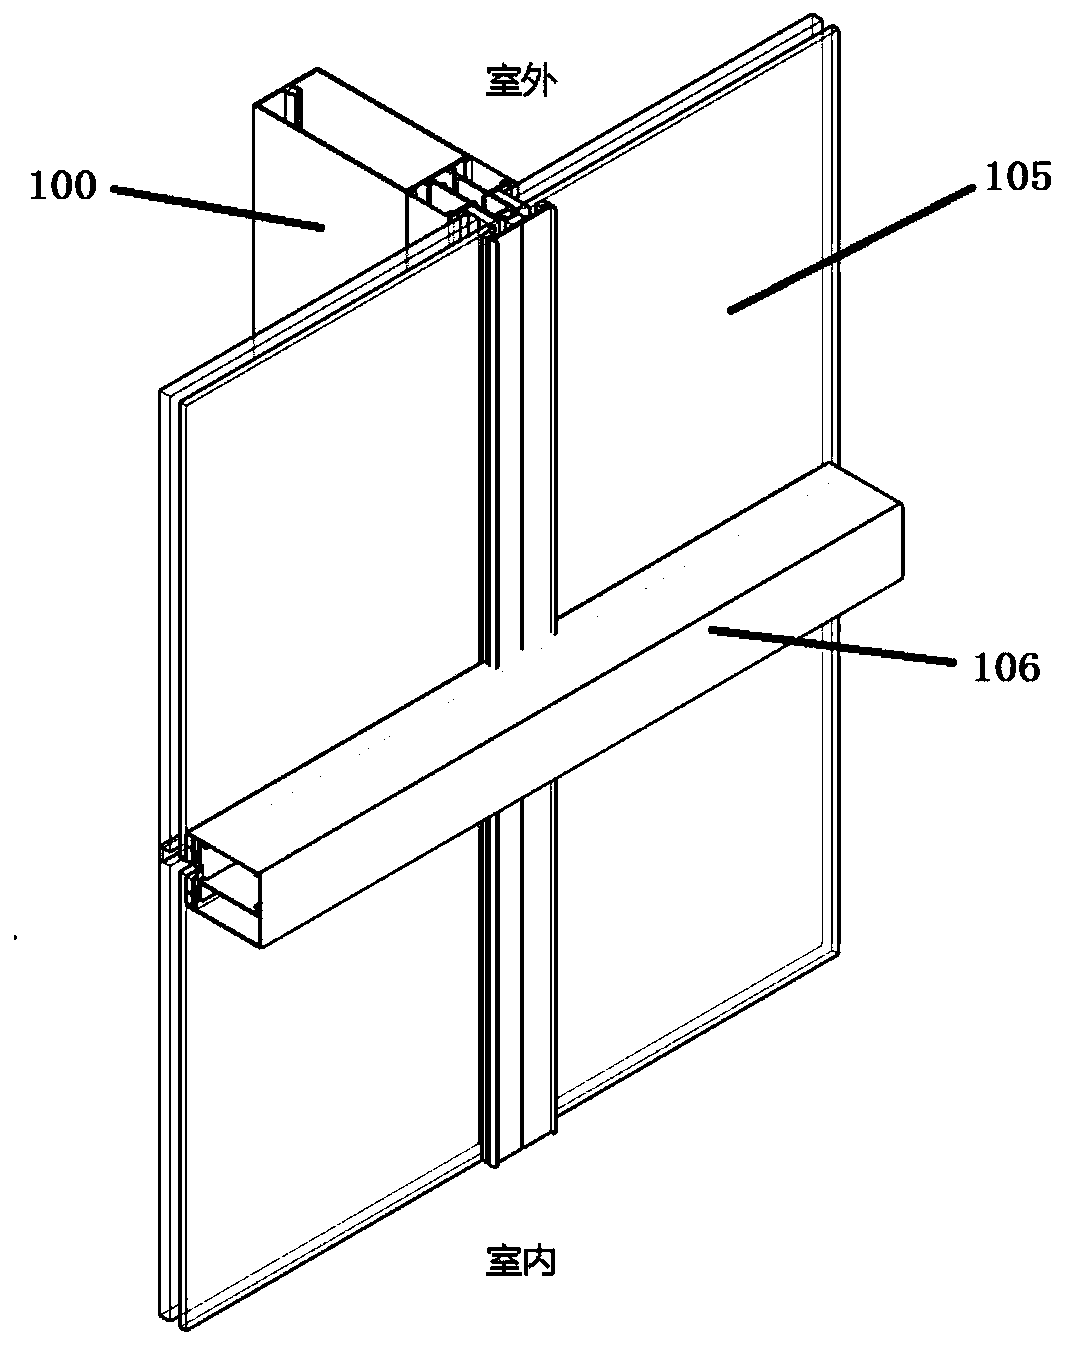 Back-mounted curtain wall